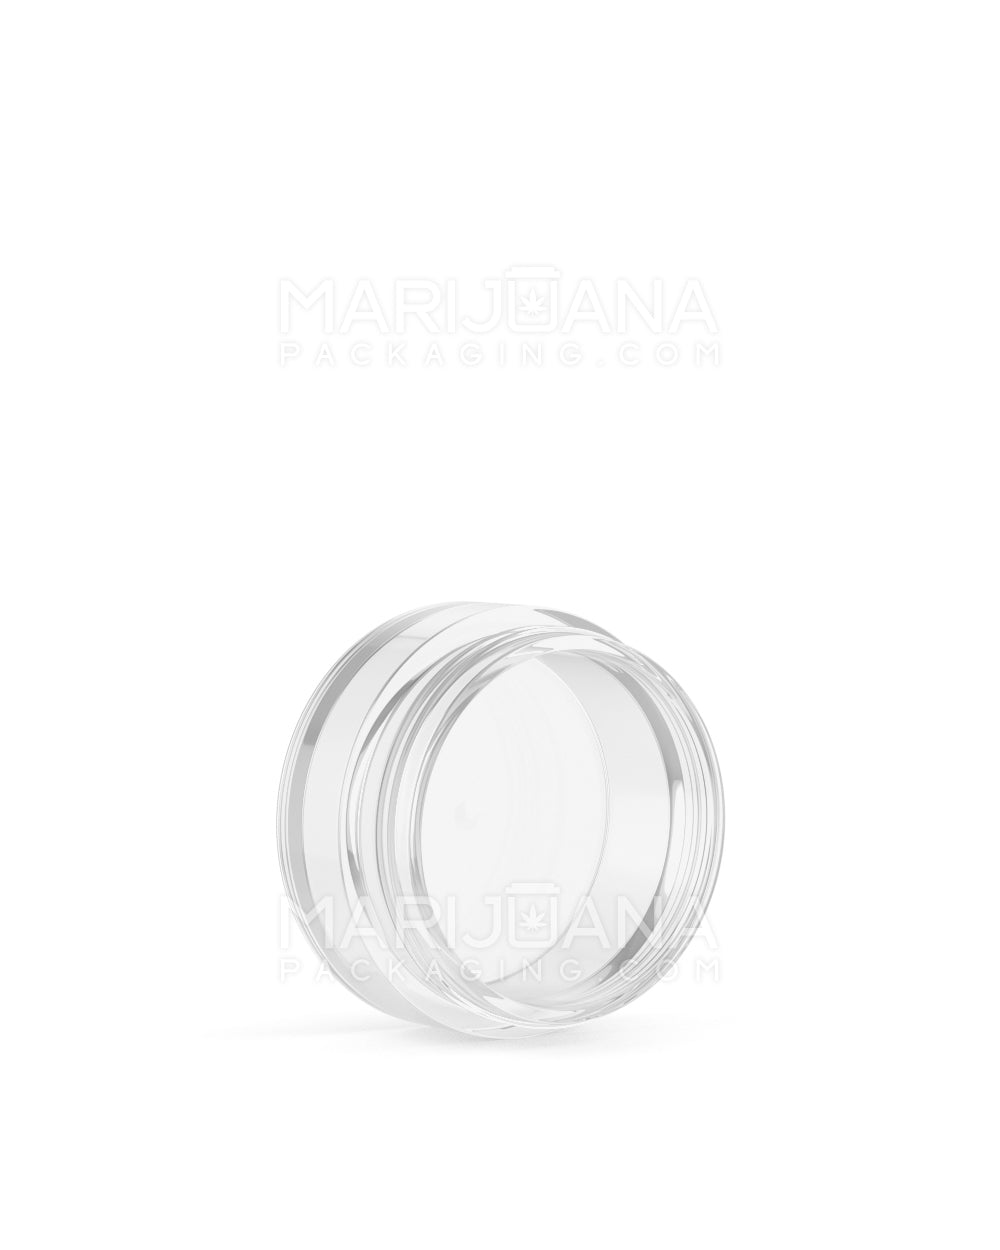 Clear Concentrate Containers w/ Screw Top Cap | 7mL - Acrylic - 200 Count - 6